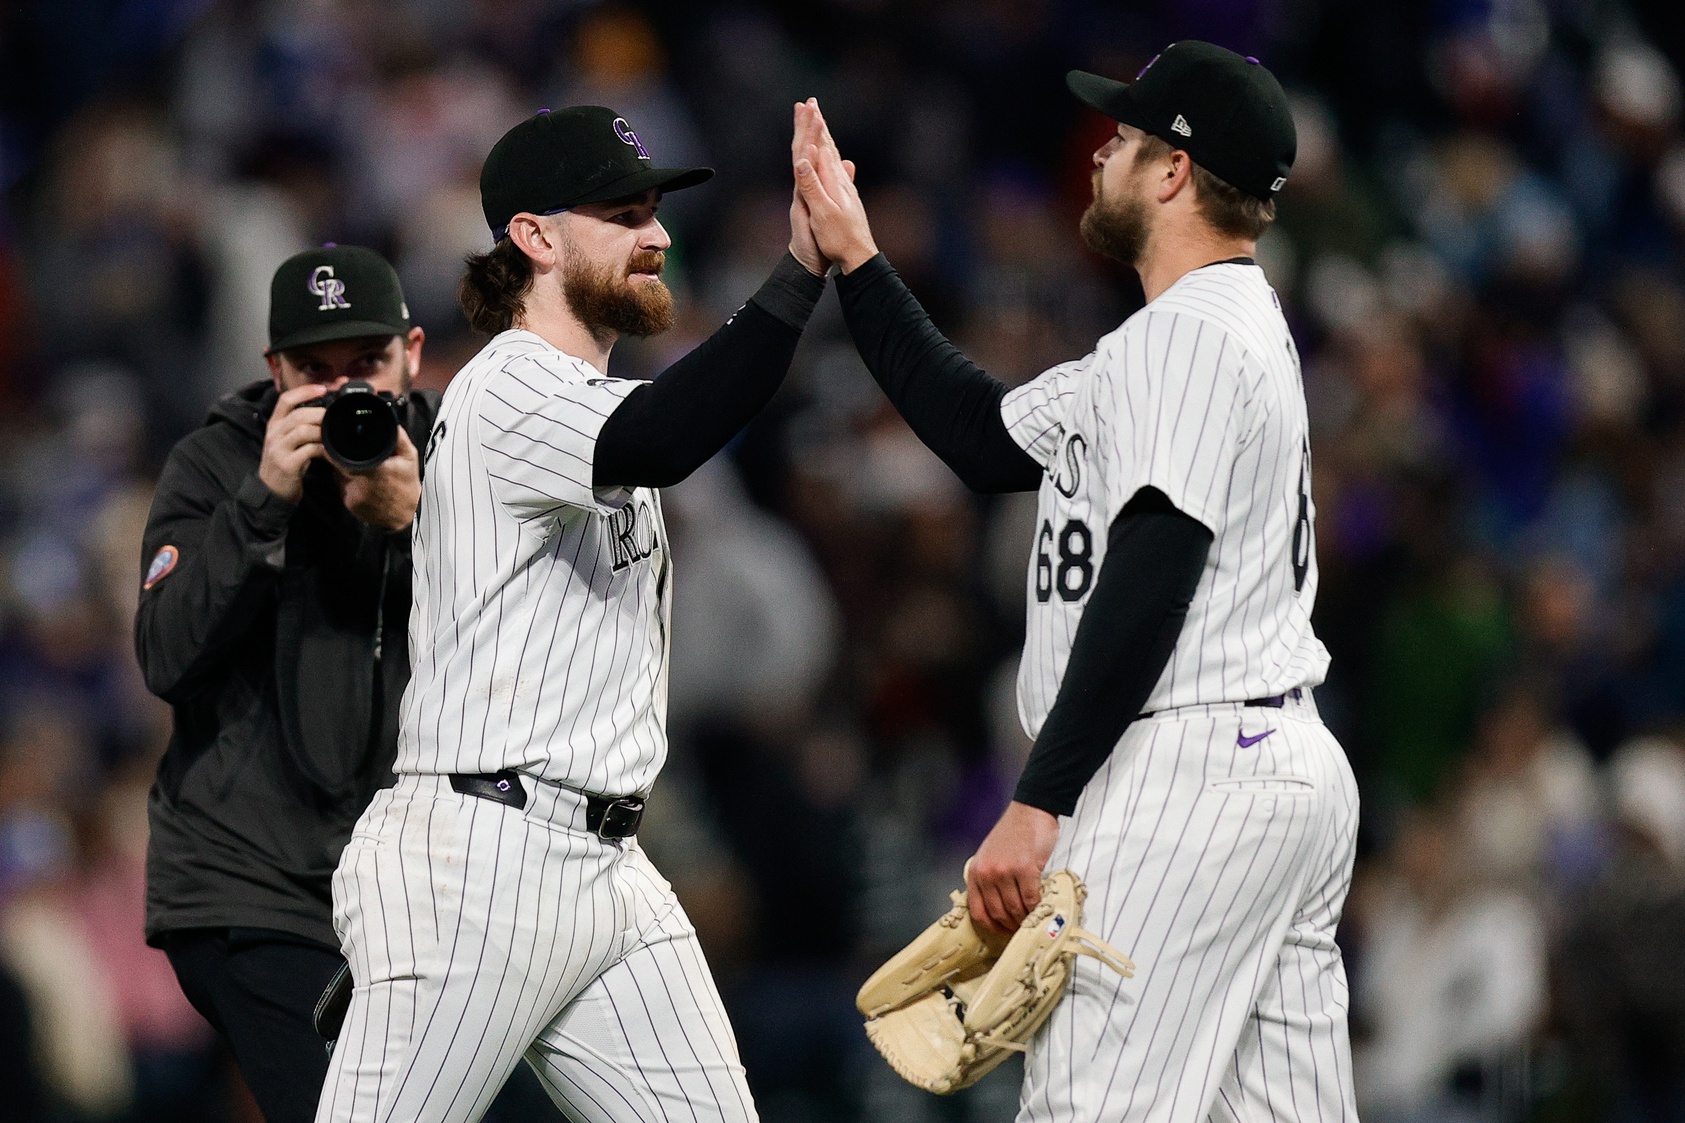 Rockies Win Back-To-Back Games For the First Time This Season